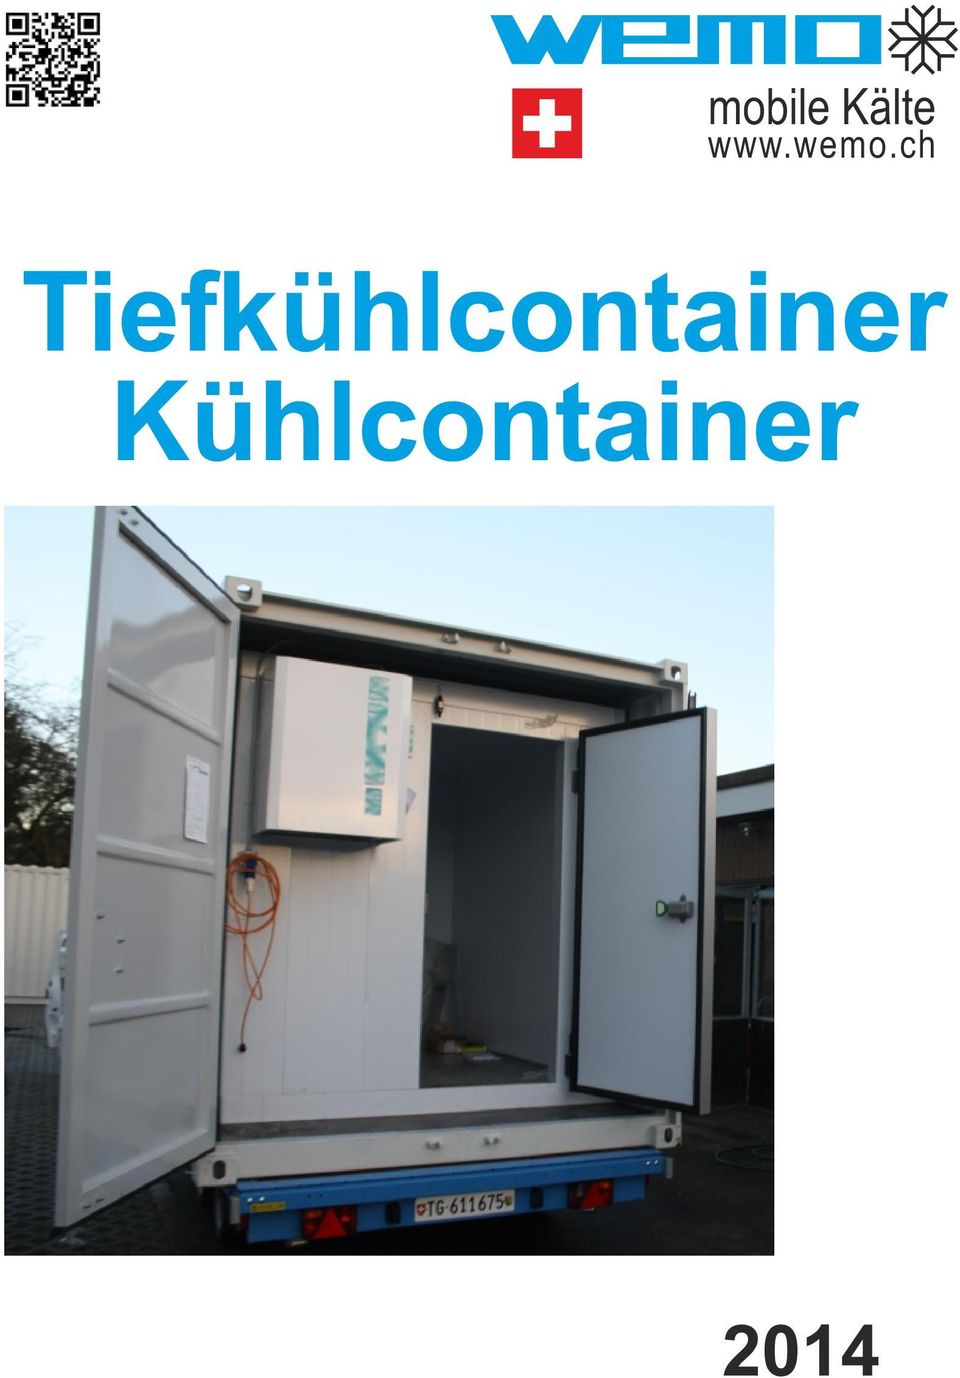 Tiefkühlcontainer Kühlcontainer - PDF Free Download